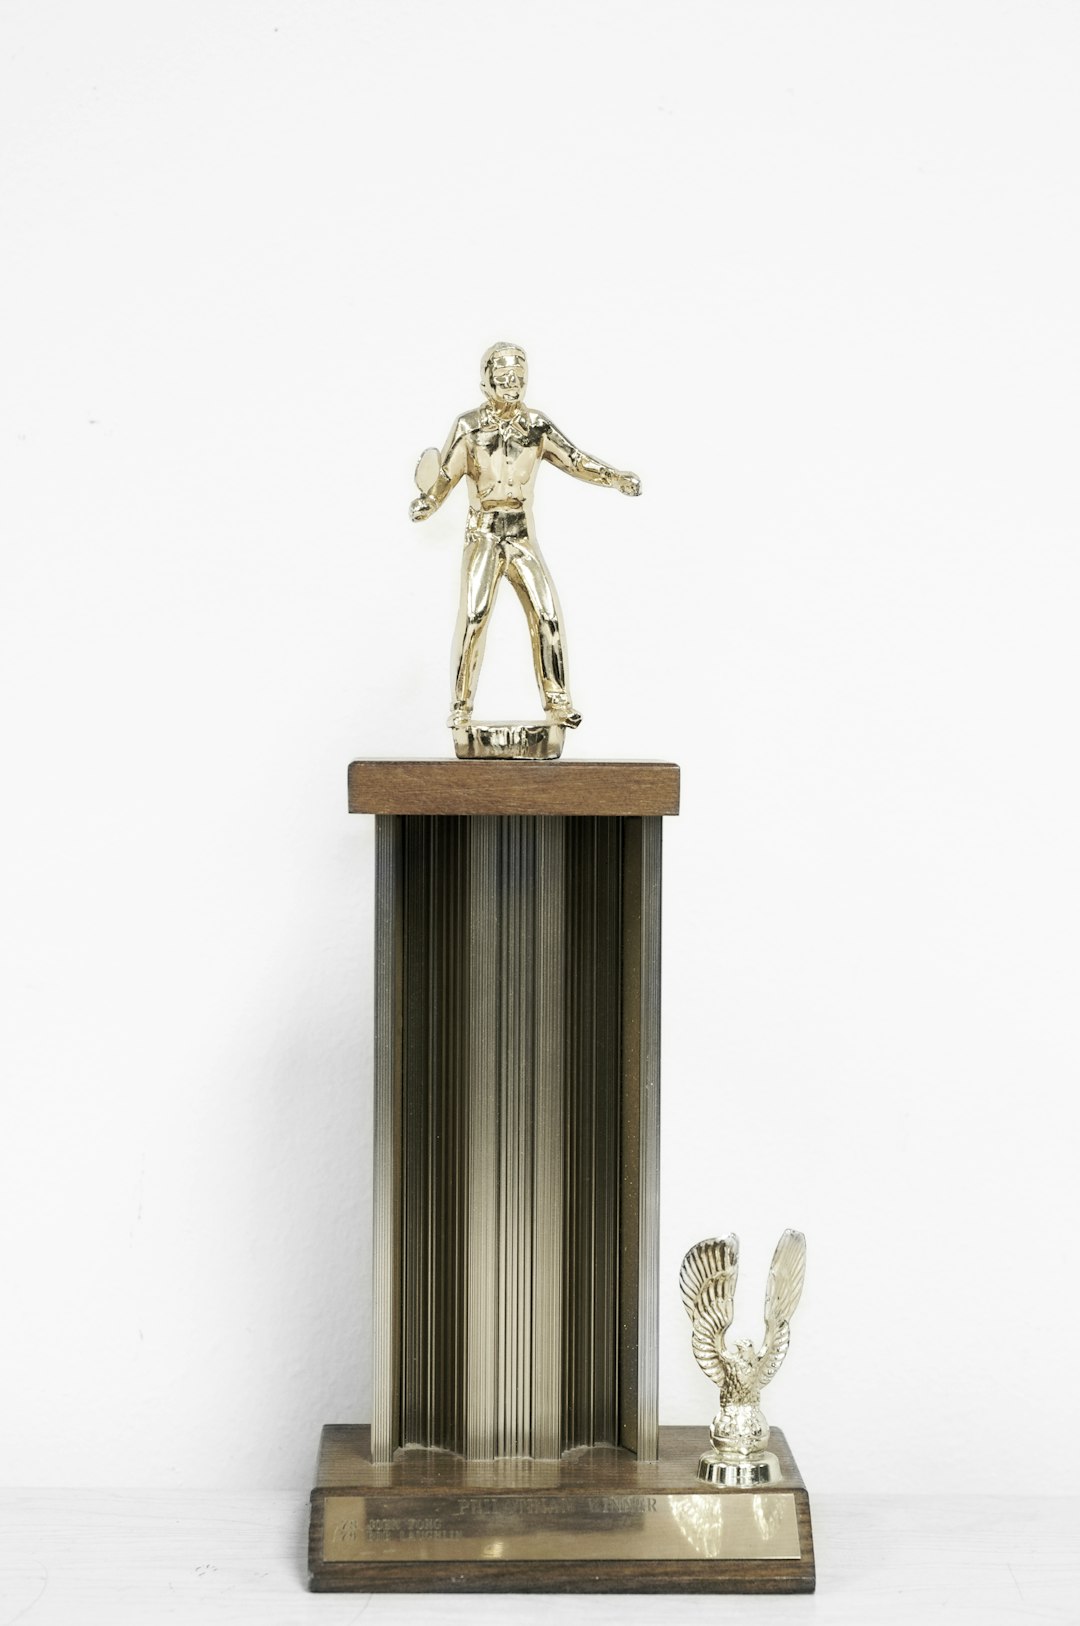 Ping Pong Trophy